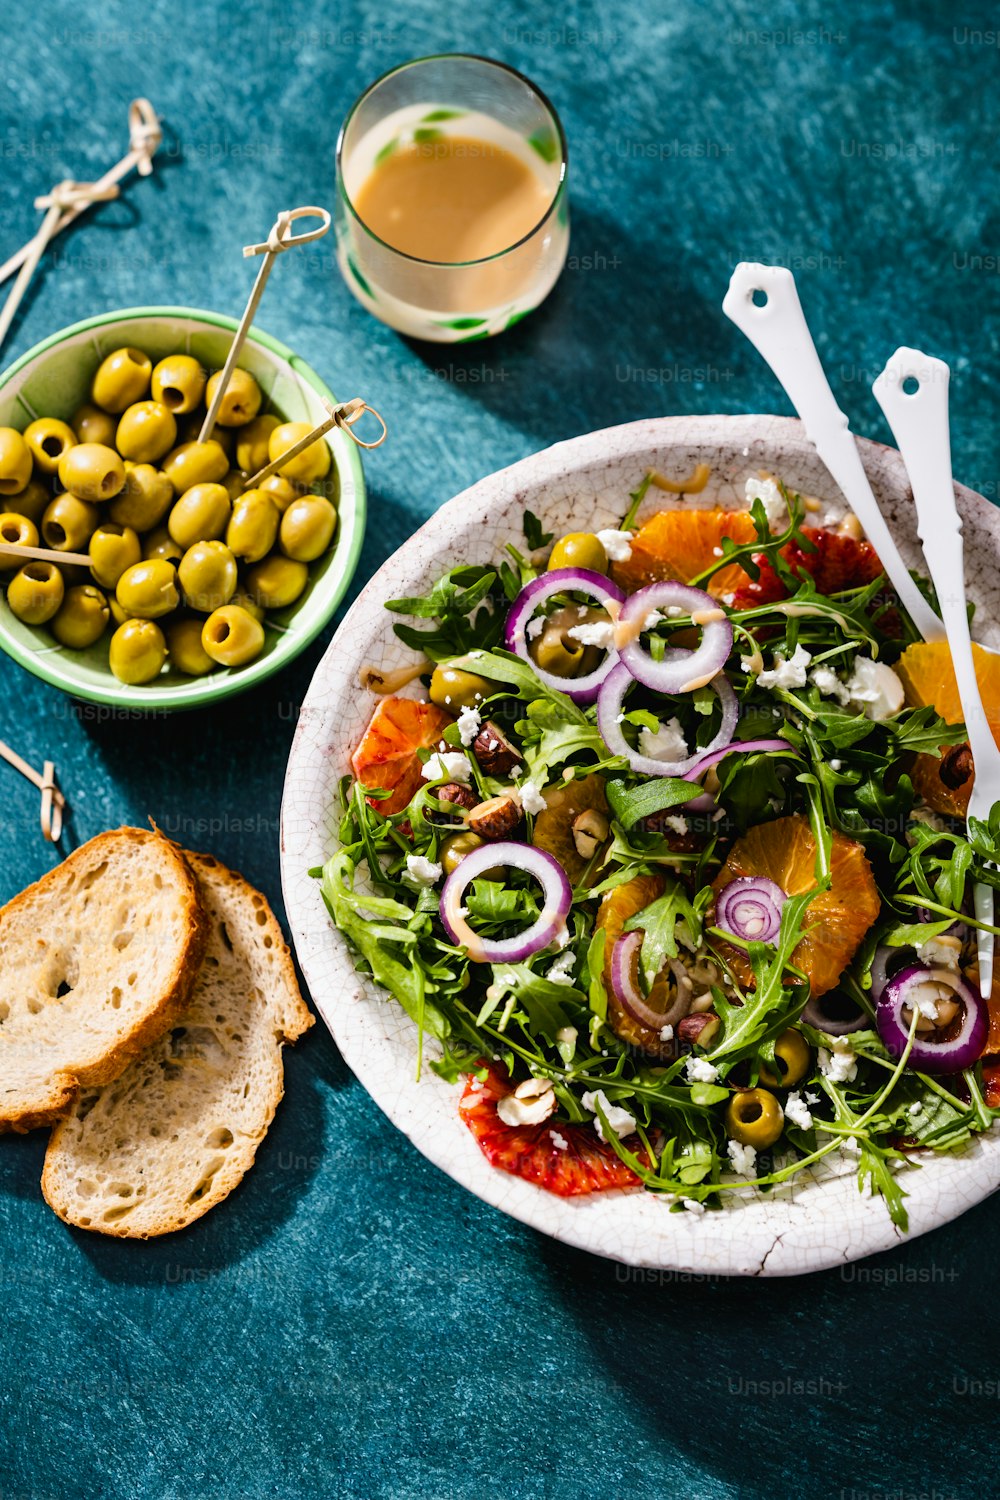 a bowl of salad next to a bowl of olives